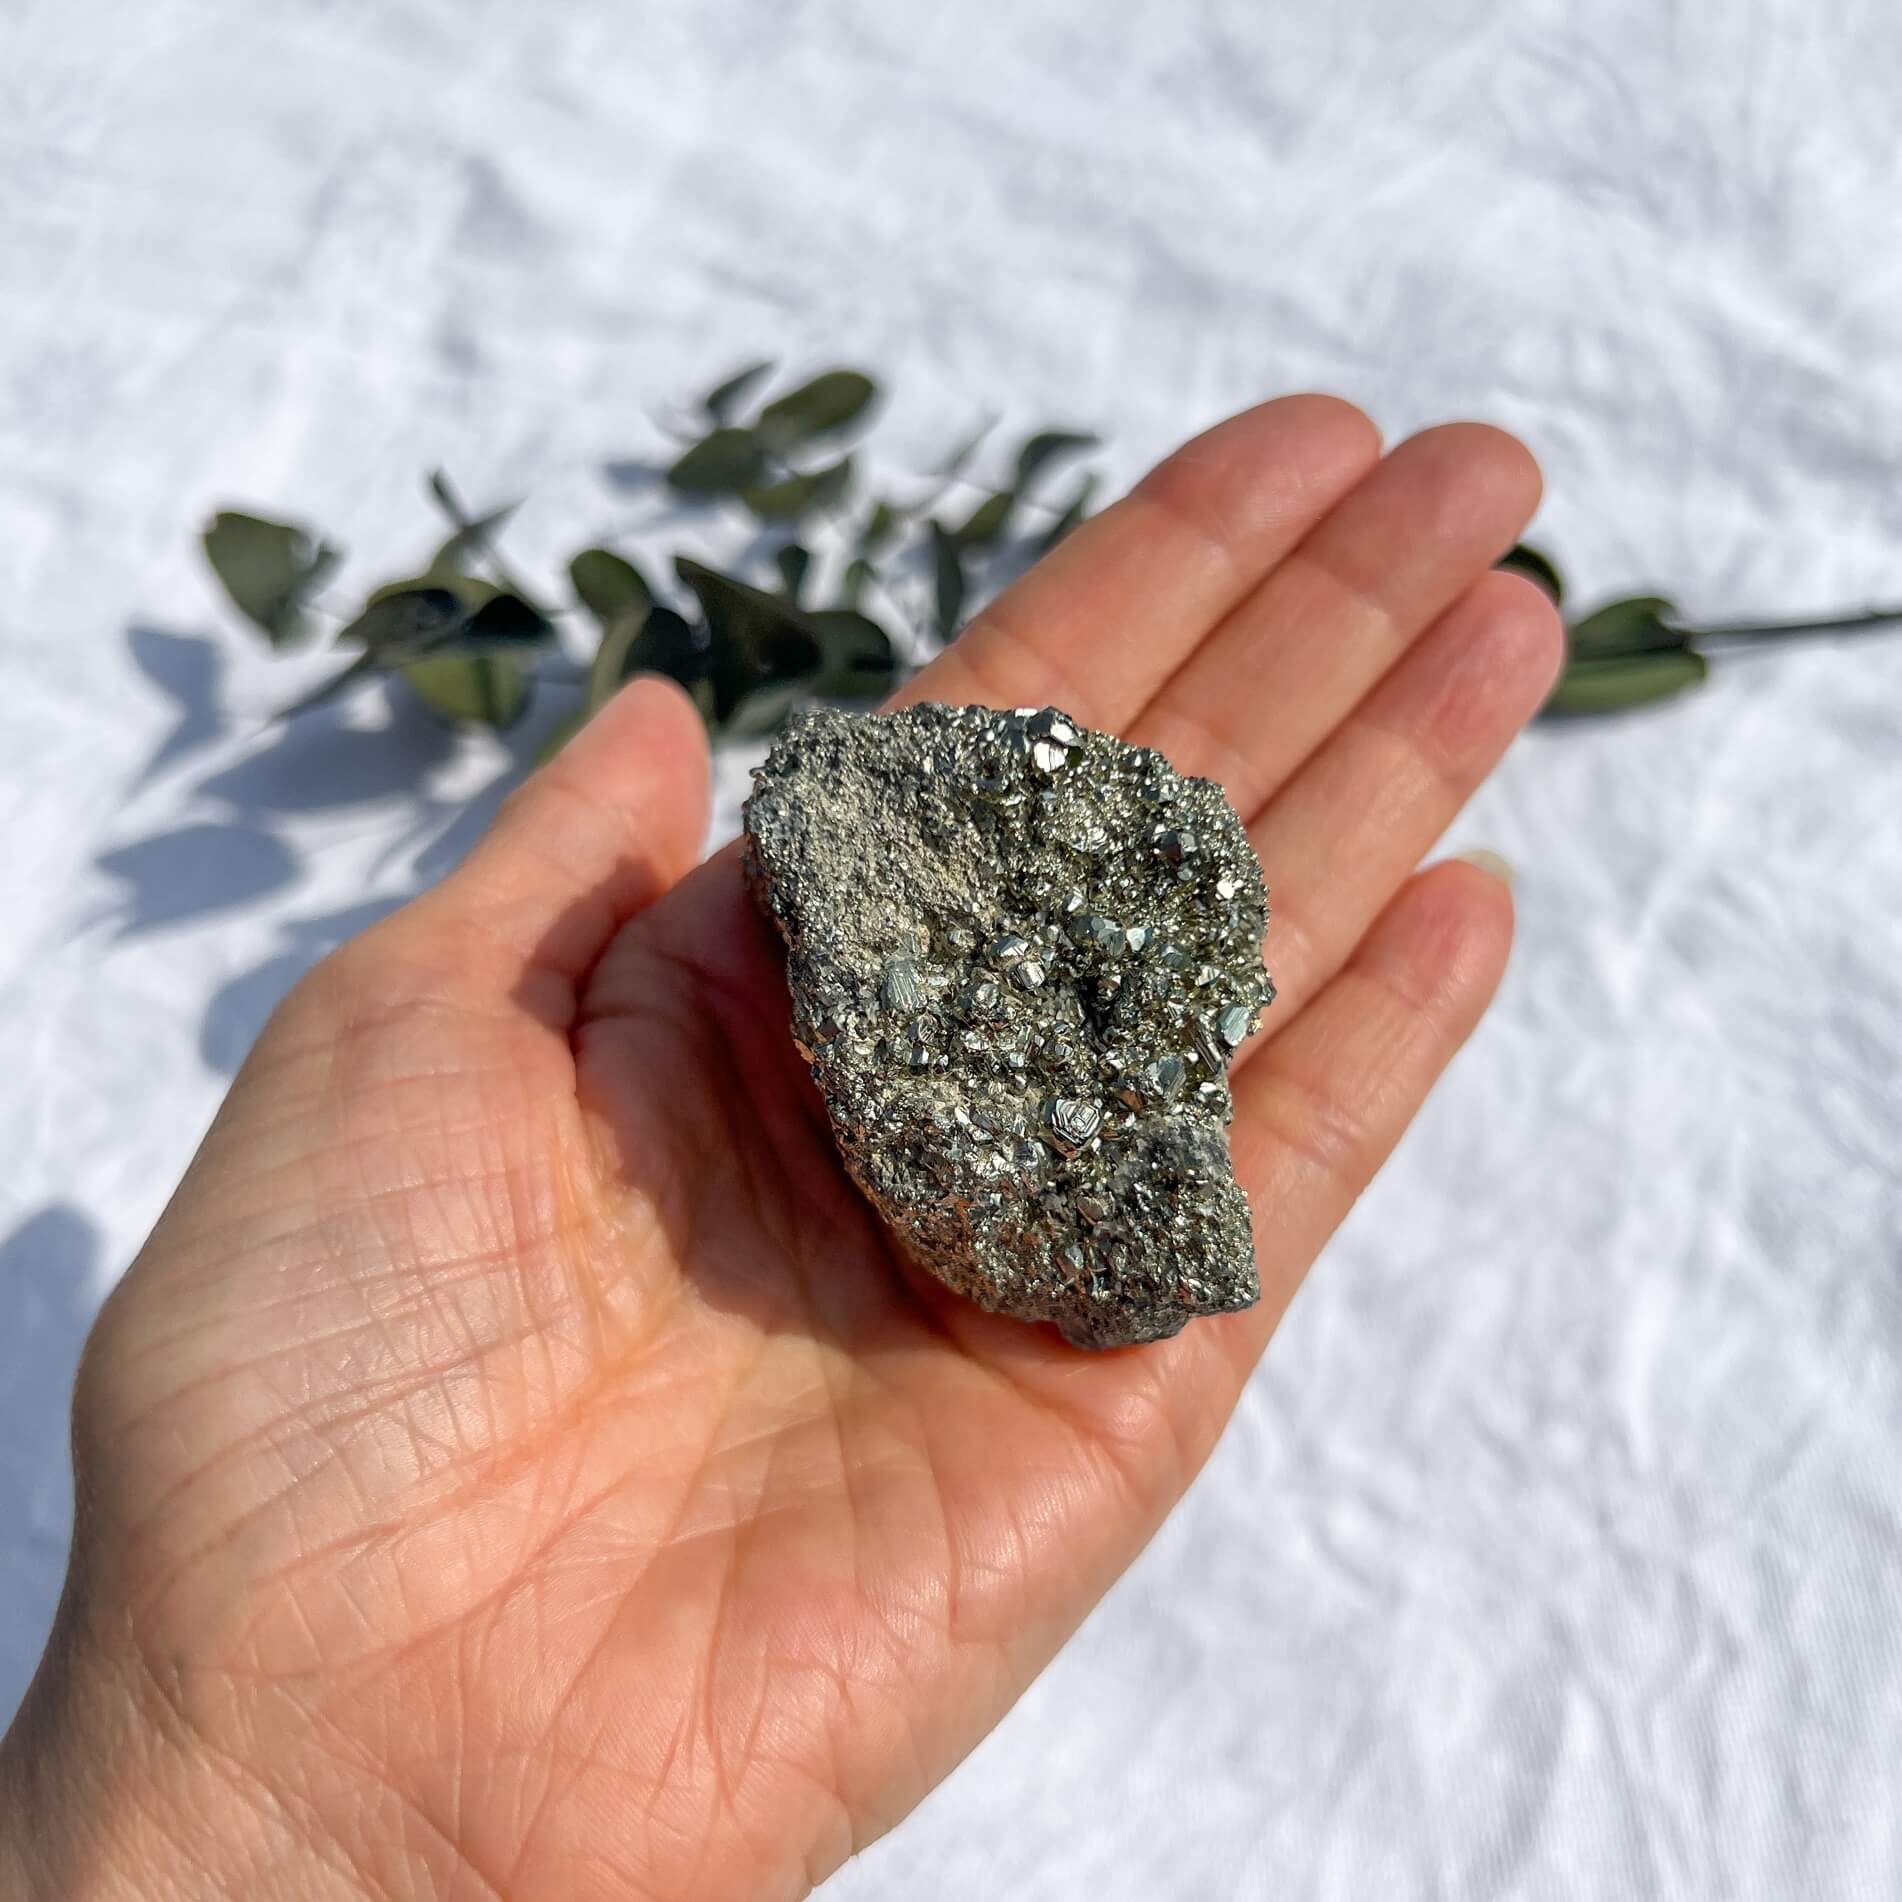 An extra large glimmering golden pyrite crystal cluster held in an outstretched hand